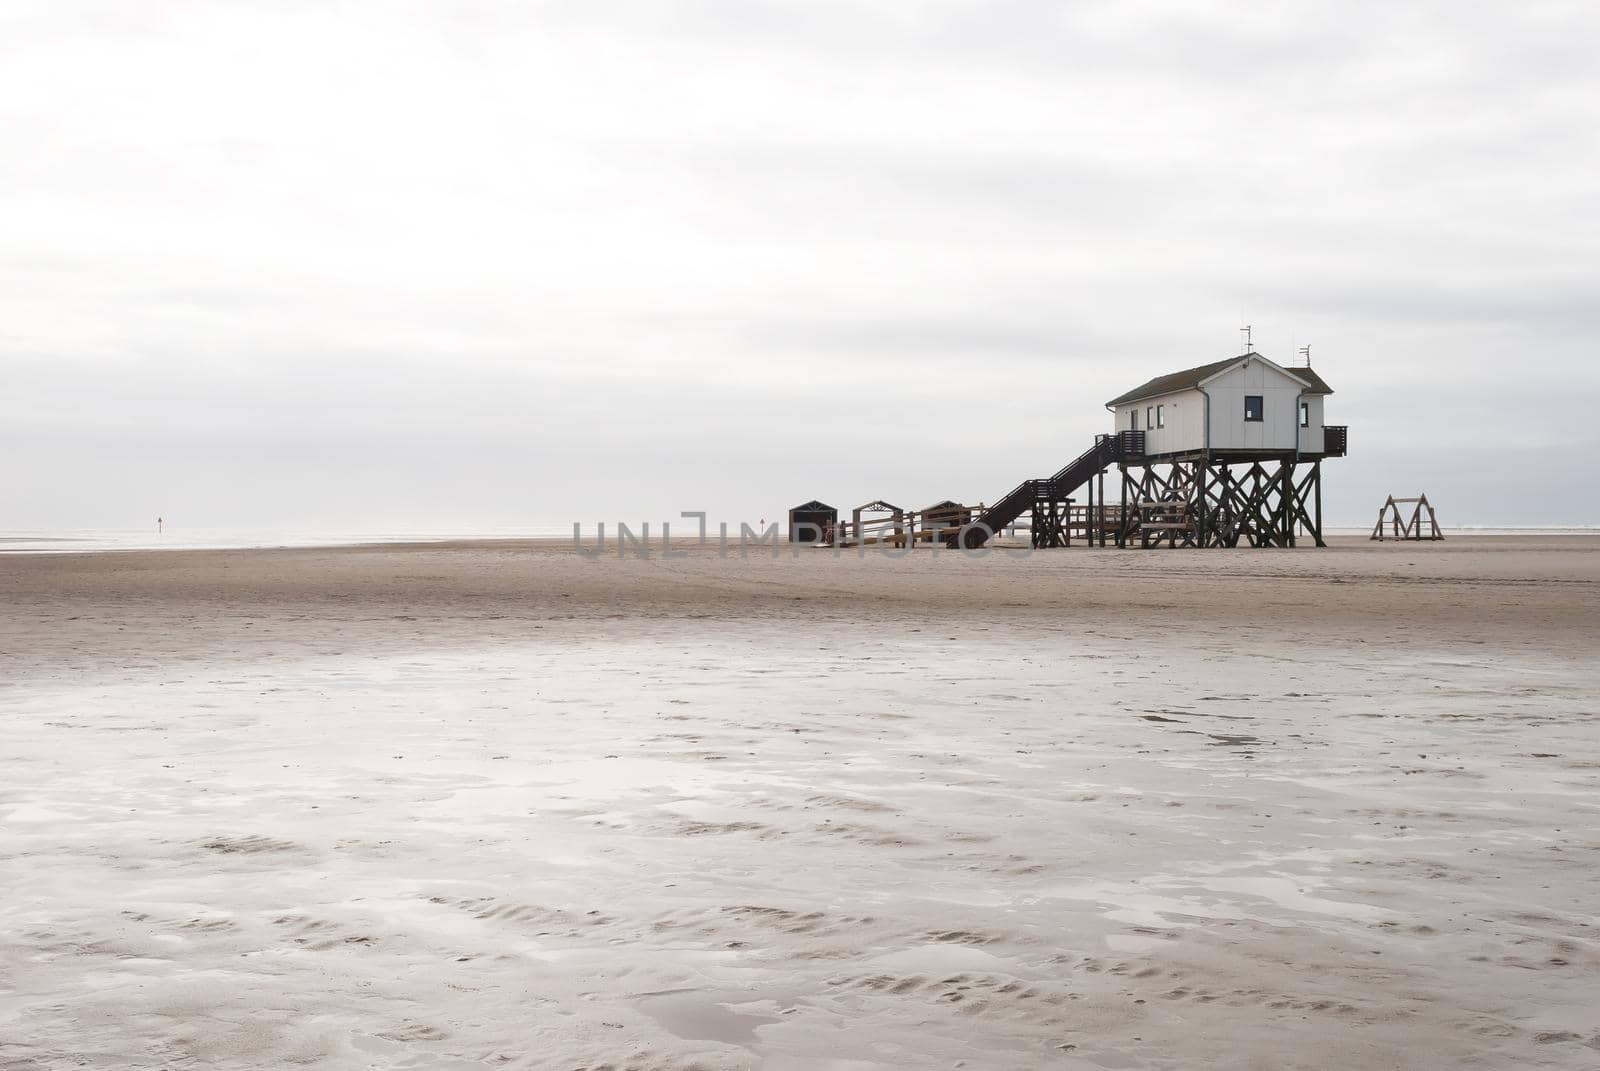 A photo of the rescuers house on the shore of the North Sea, Sankt Peter-Ording, Germany